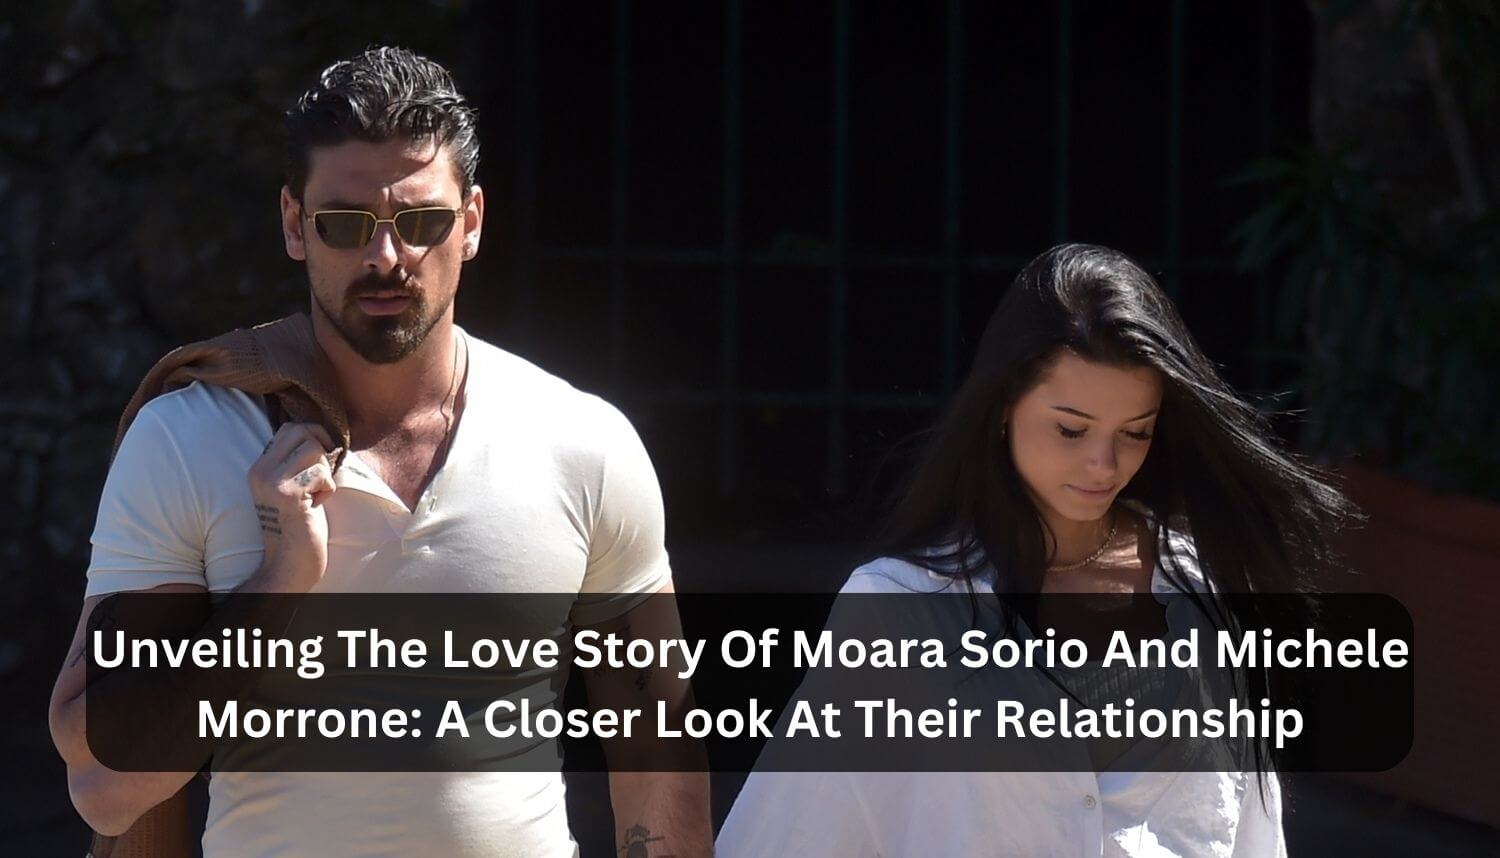 Unveiling The Love Story Of Moara Sorio And Michele Morrone A Closer Look At Their Relationship